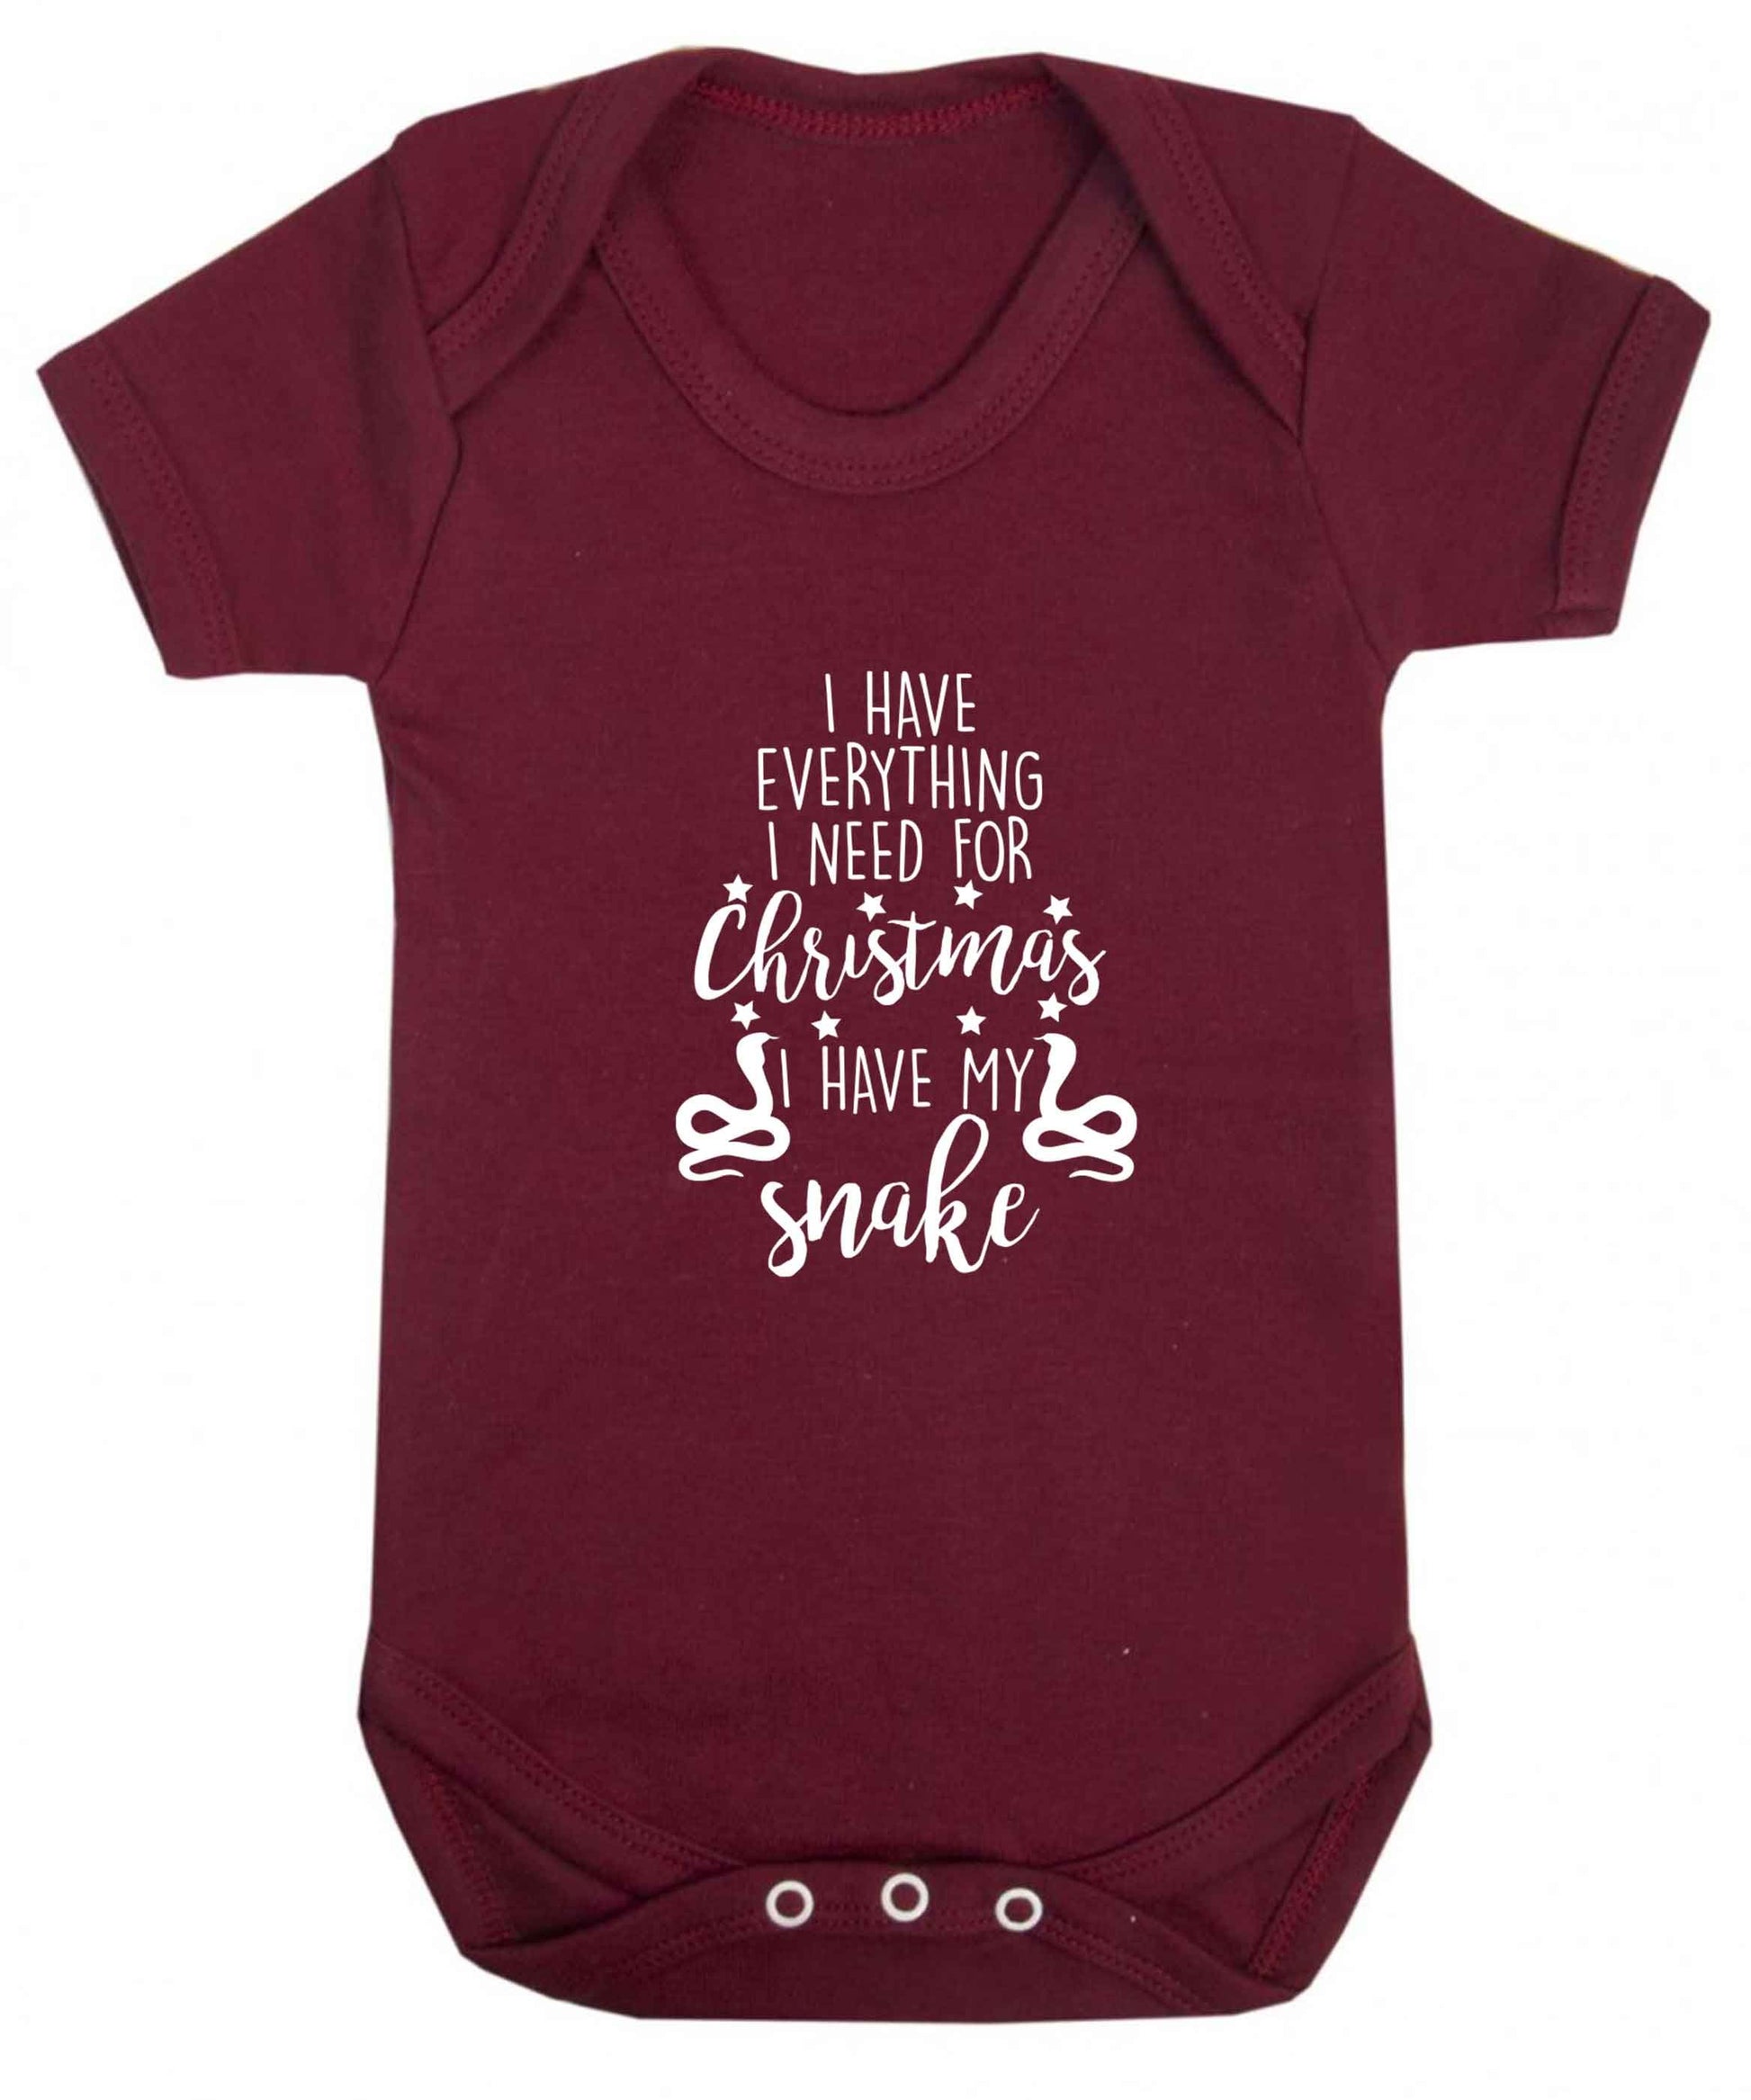 I have everything I need for Christmas I have my snake baby vest maroon 18-24 months